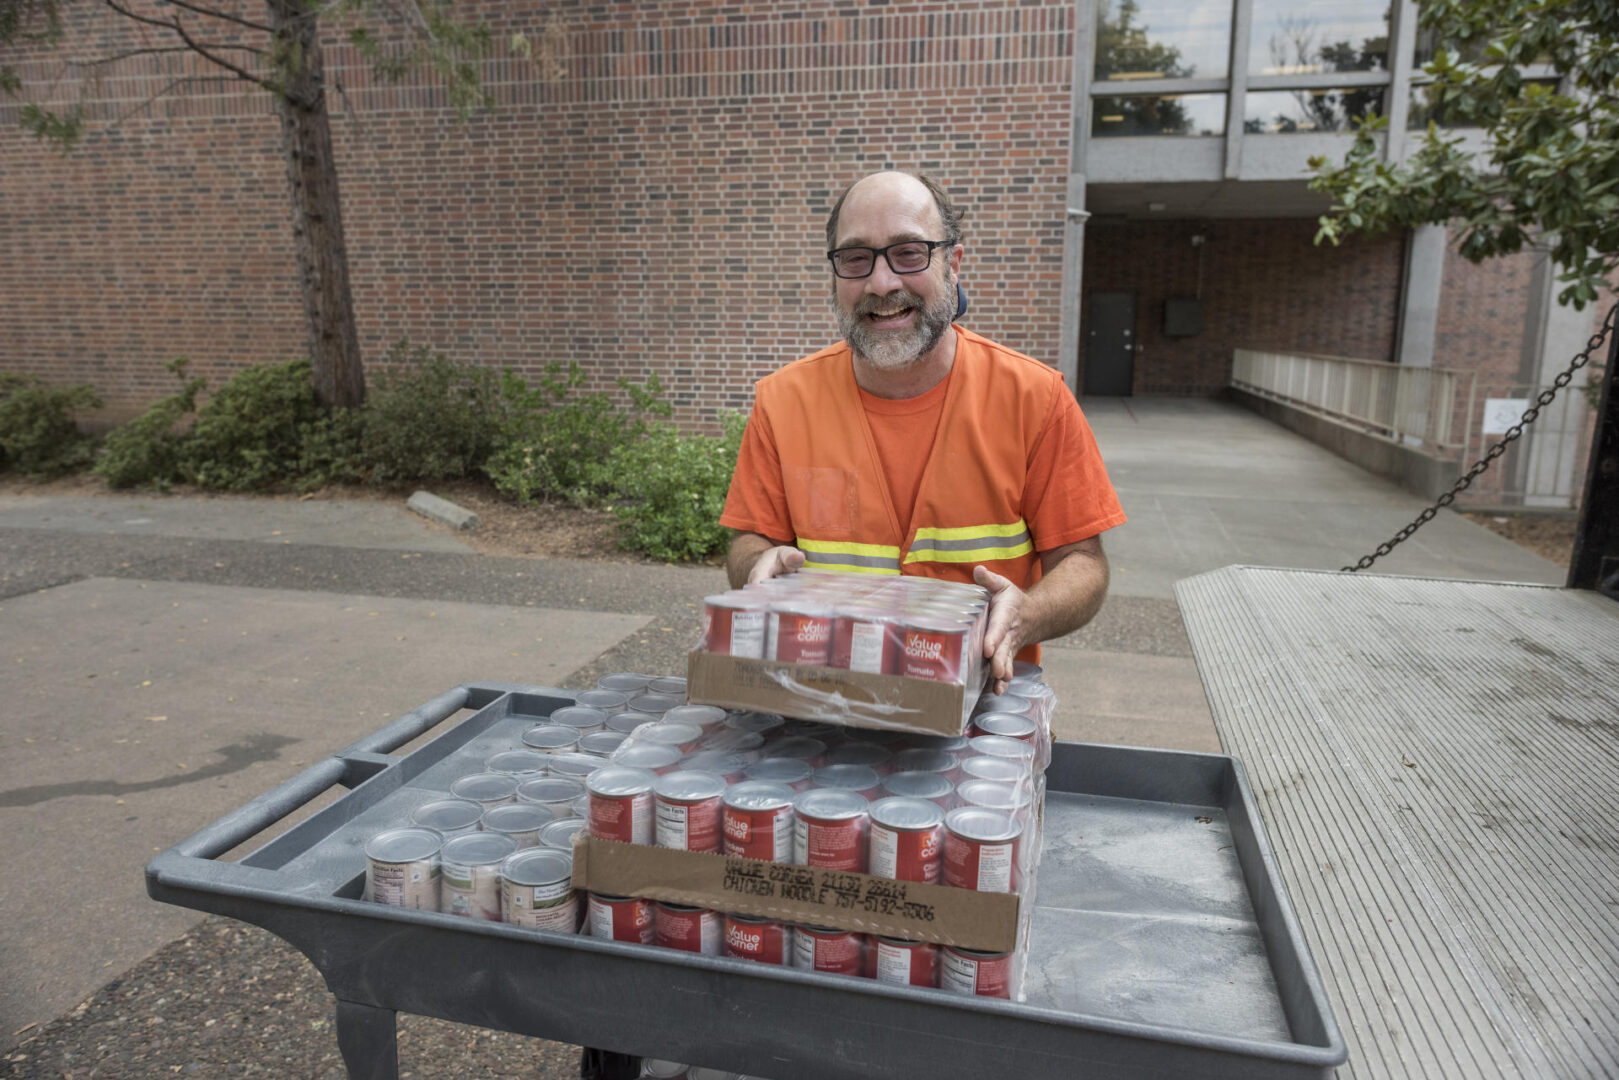 Joe Picard, wearing an orange shirt, places packages of tomato sauce on a cart.